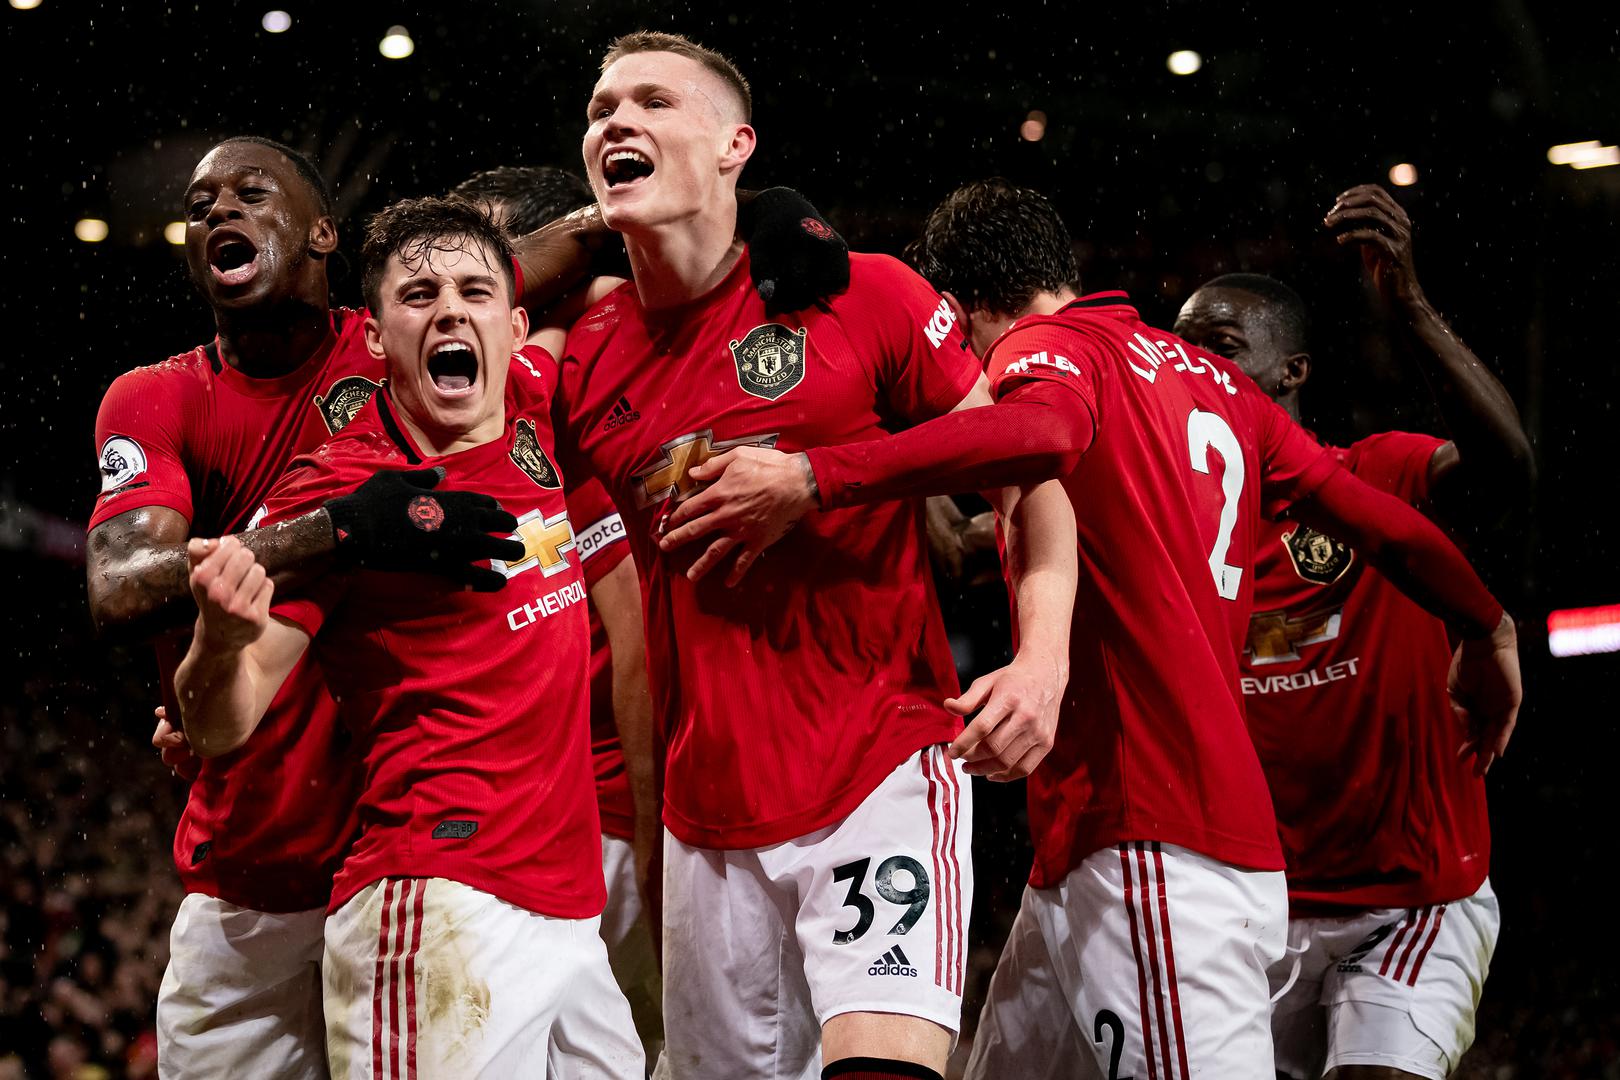 Match pics from Man Utd v Man City on 8 March 2020 | Manchester United